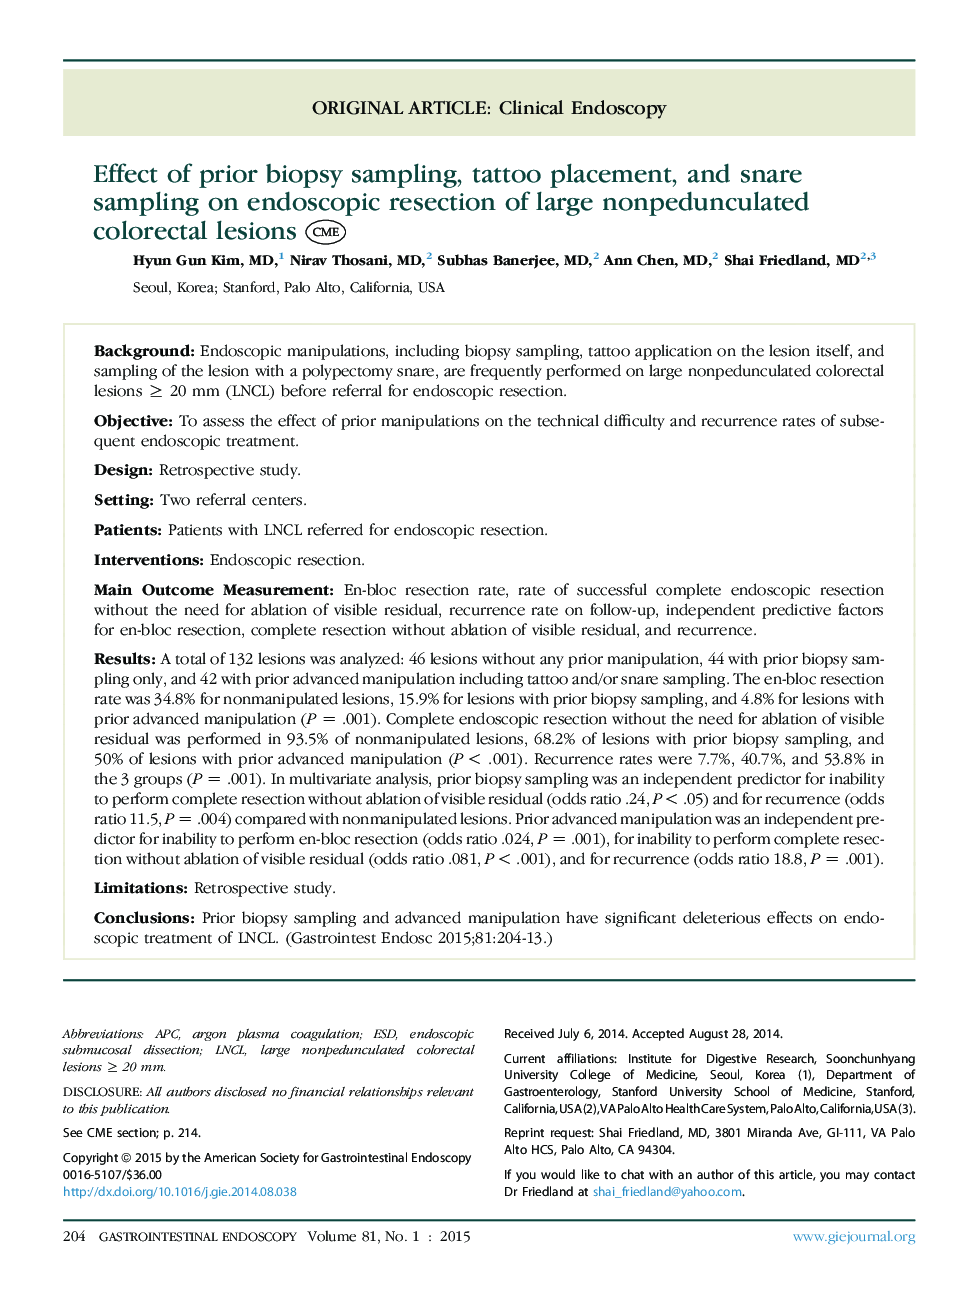 Effect of prior biopsy sampling, tattoo placement, and snare sampling on endoscopic resection of large nonpedunculated colorectal lesions 